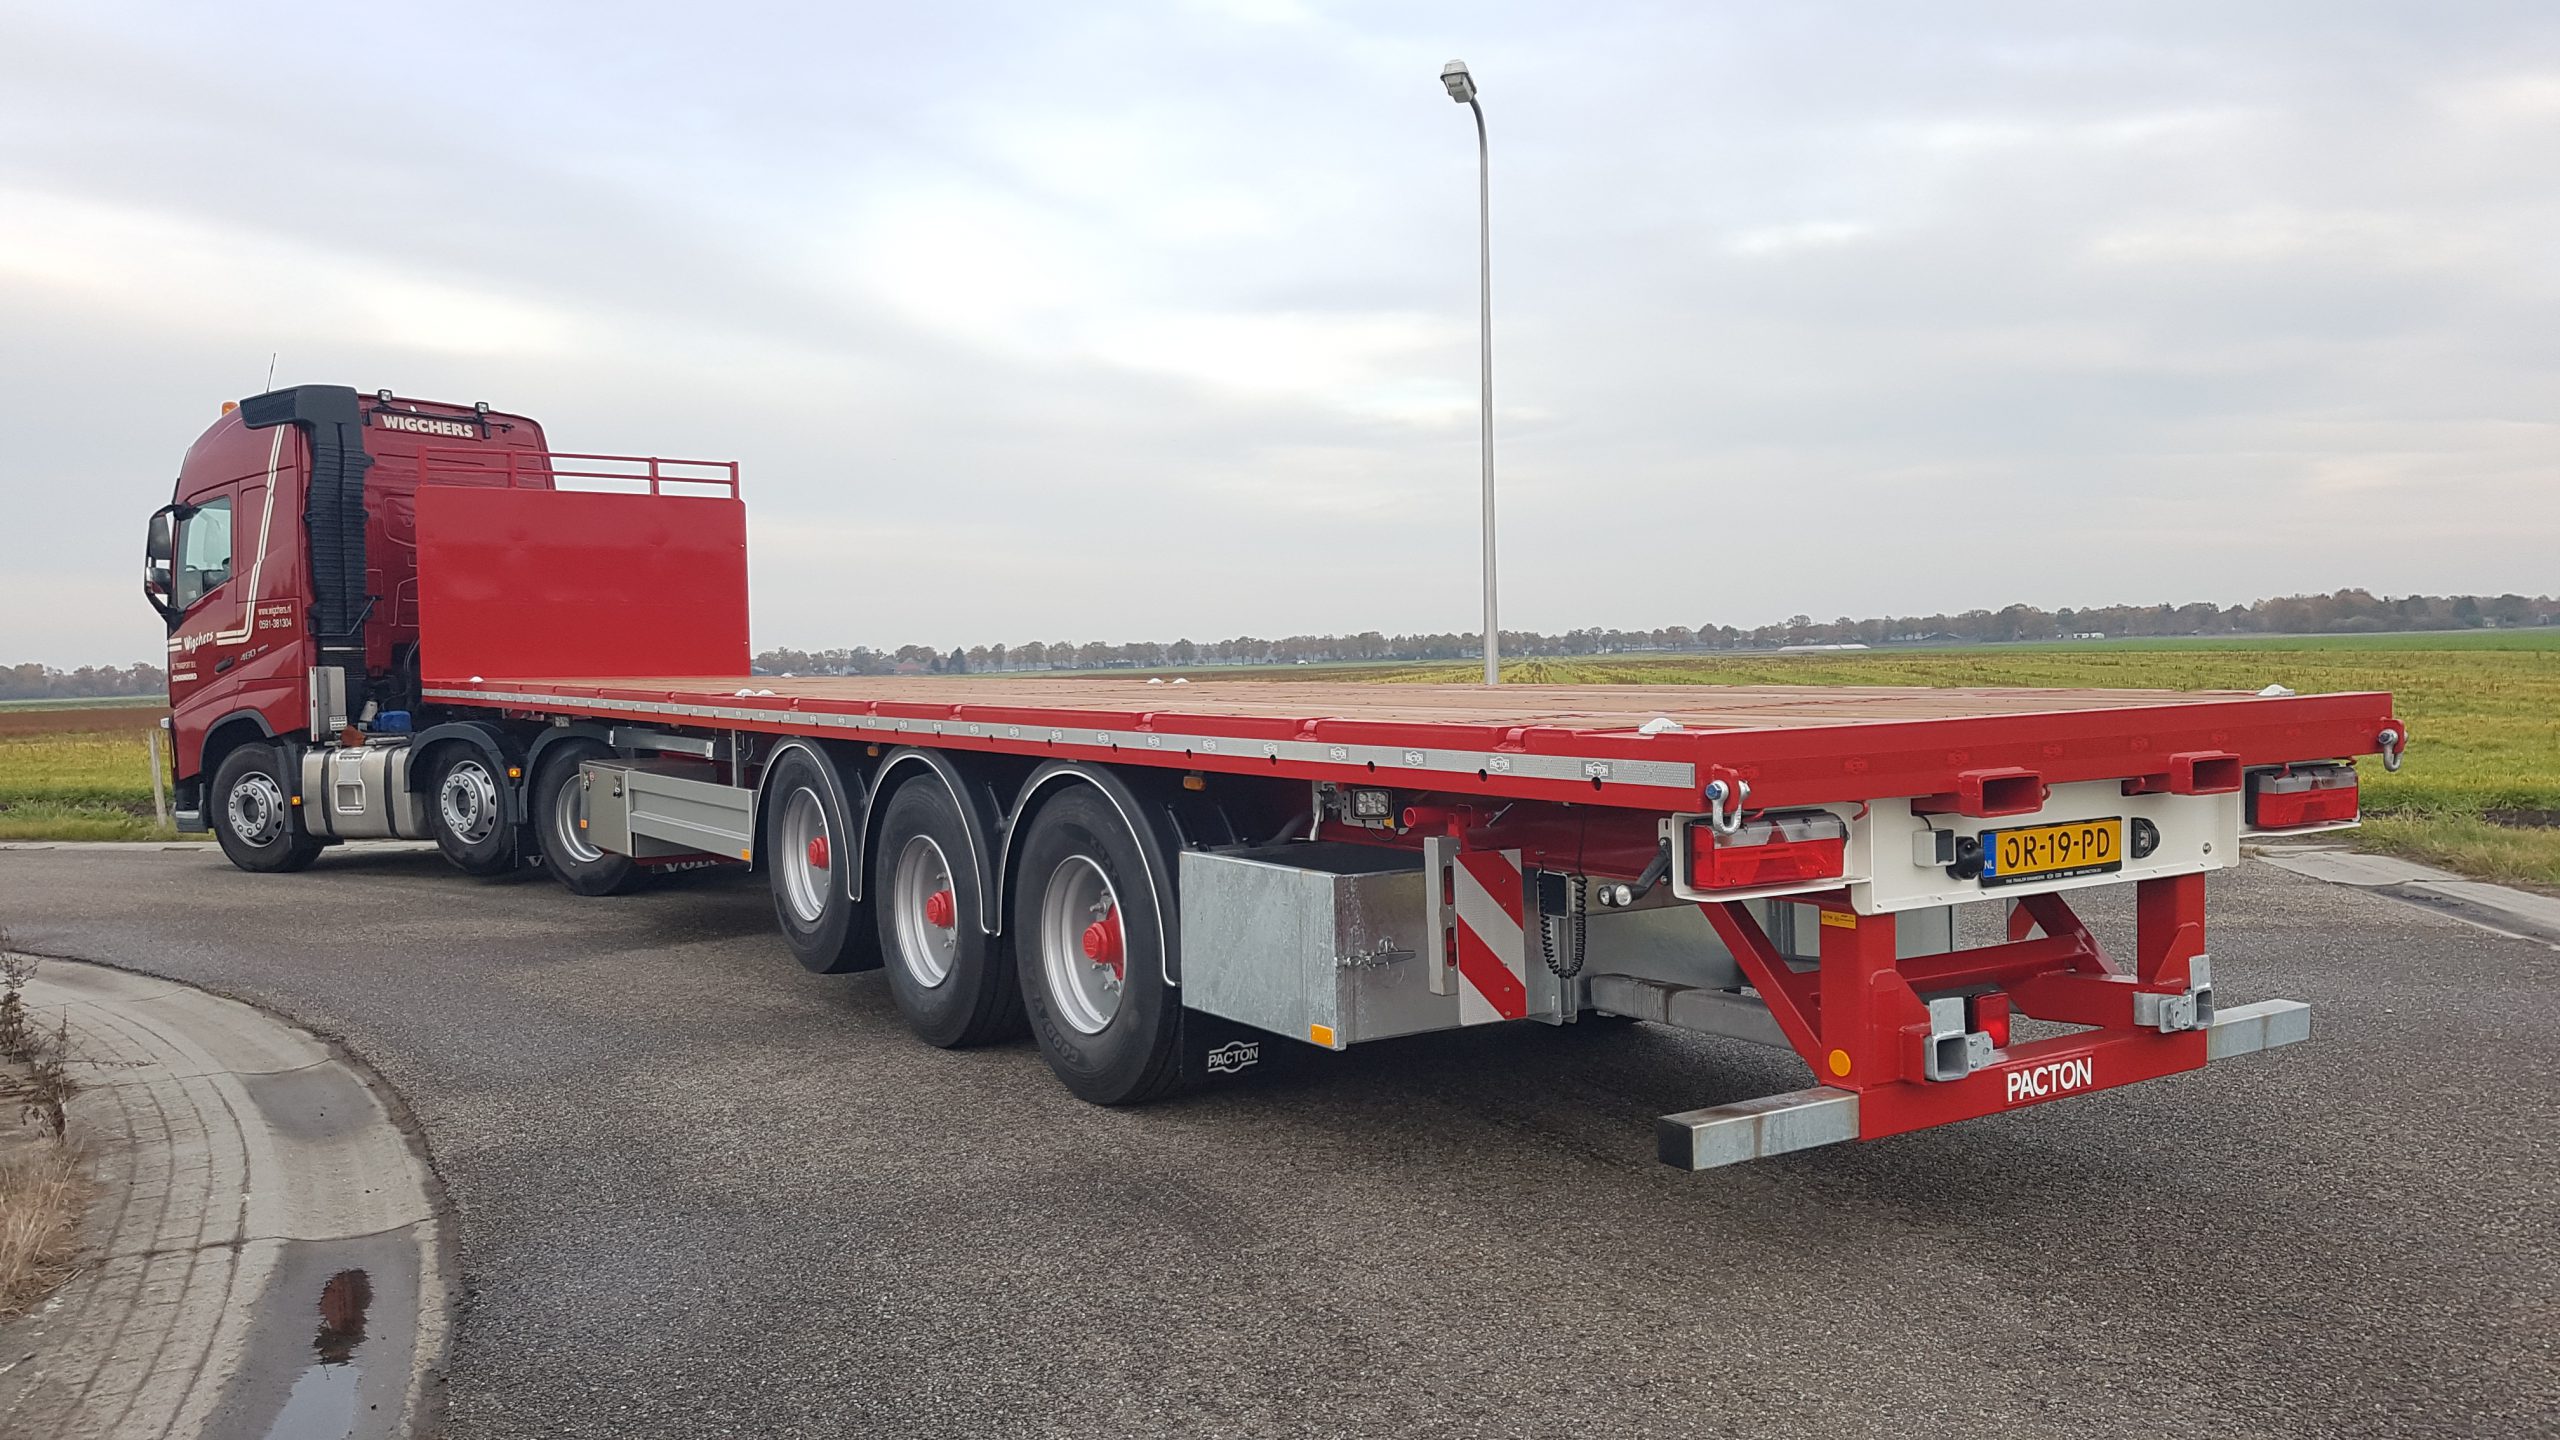 WIGCHERS ON A ROLL WITH A RANGE OF PACTON TRAILERS